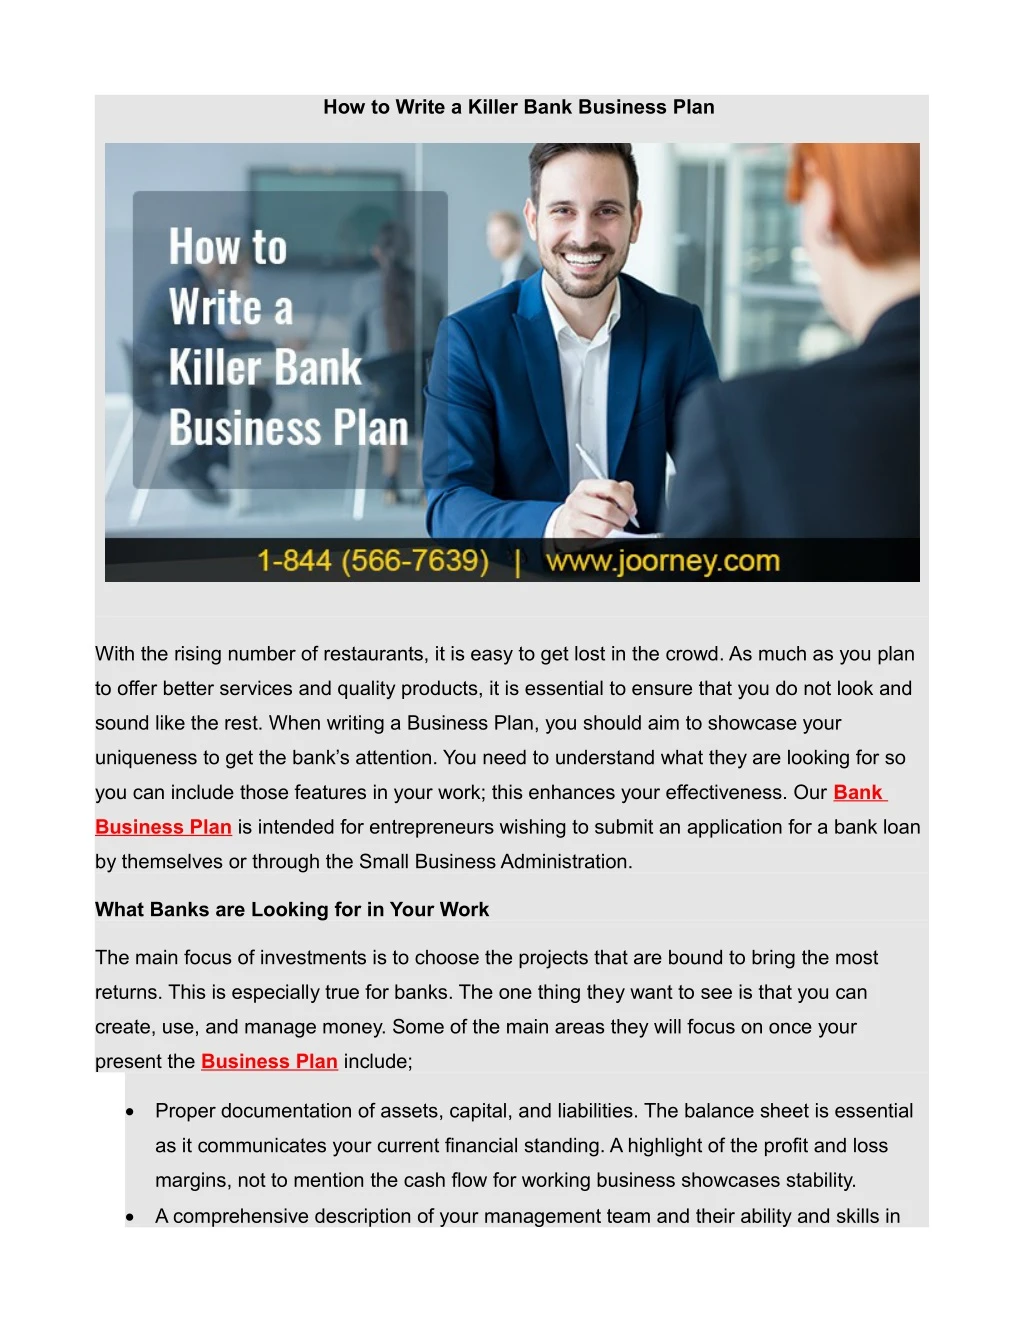 how to write a killer bank business plan